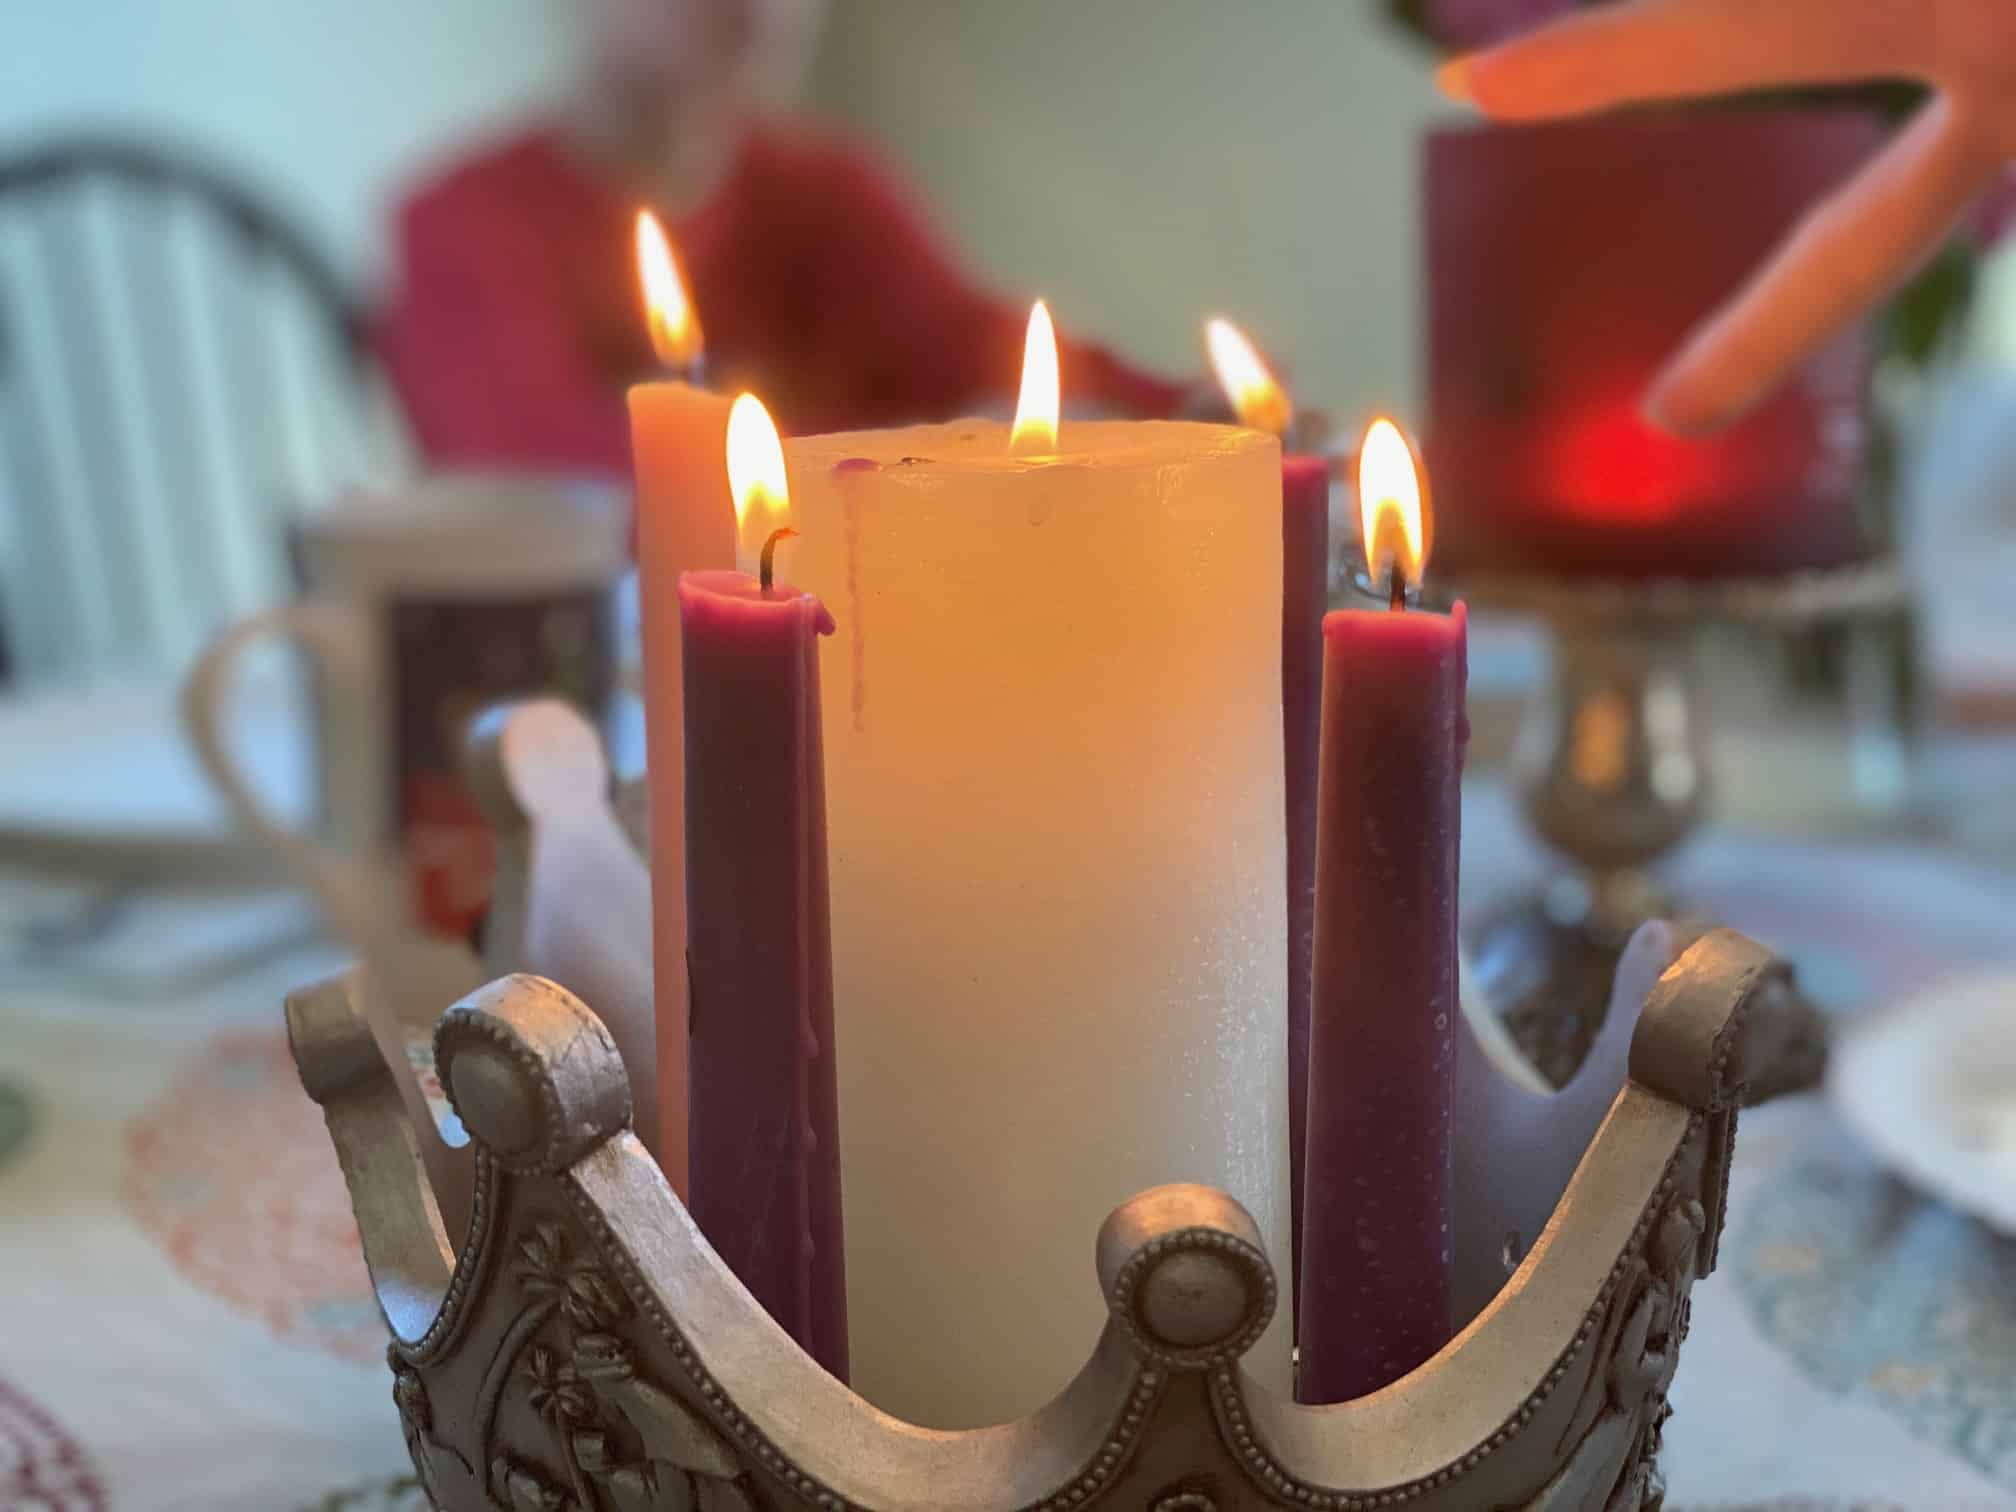 Advent Wreath & Candles